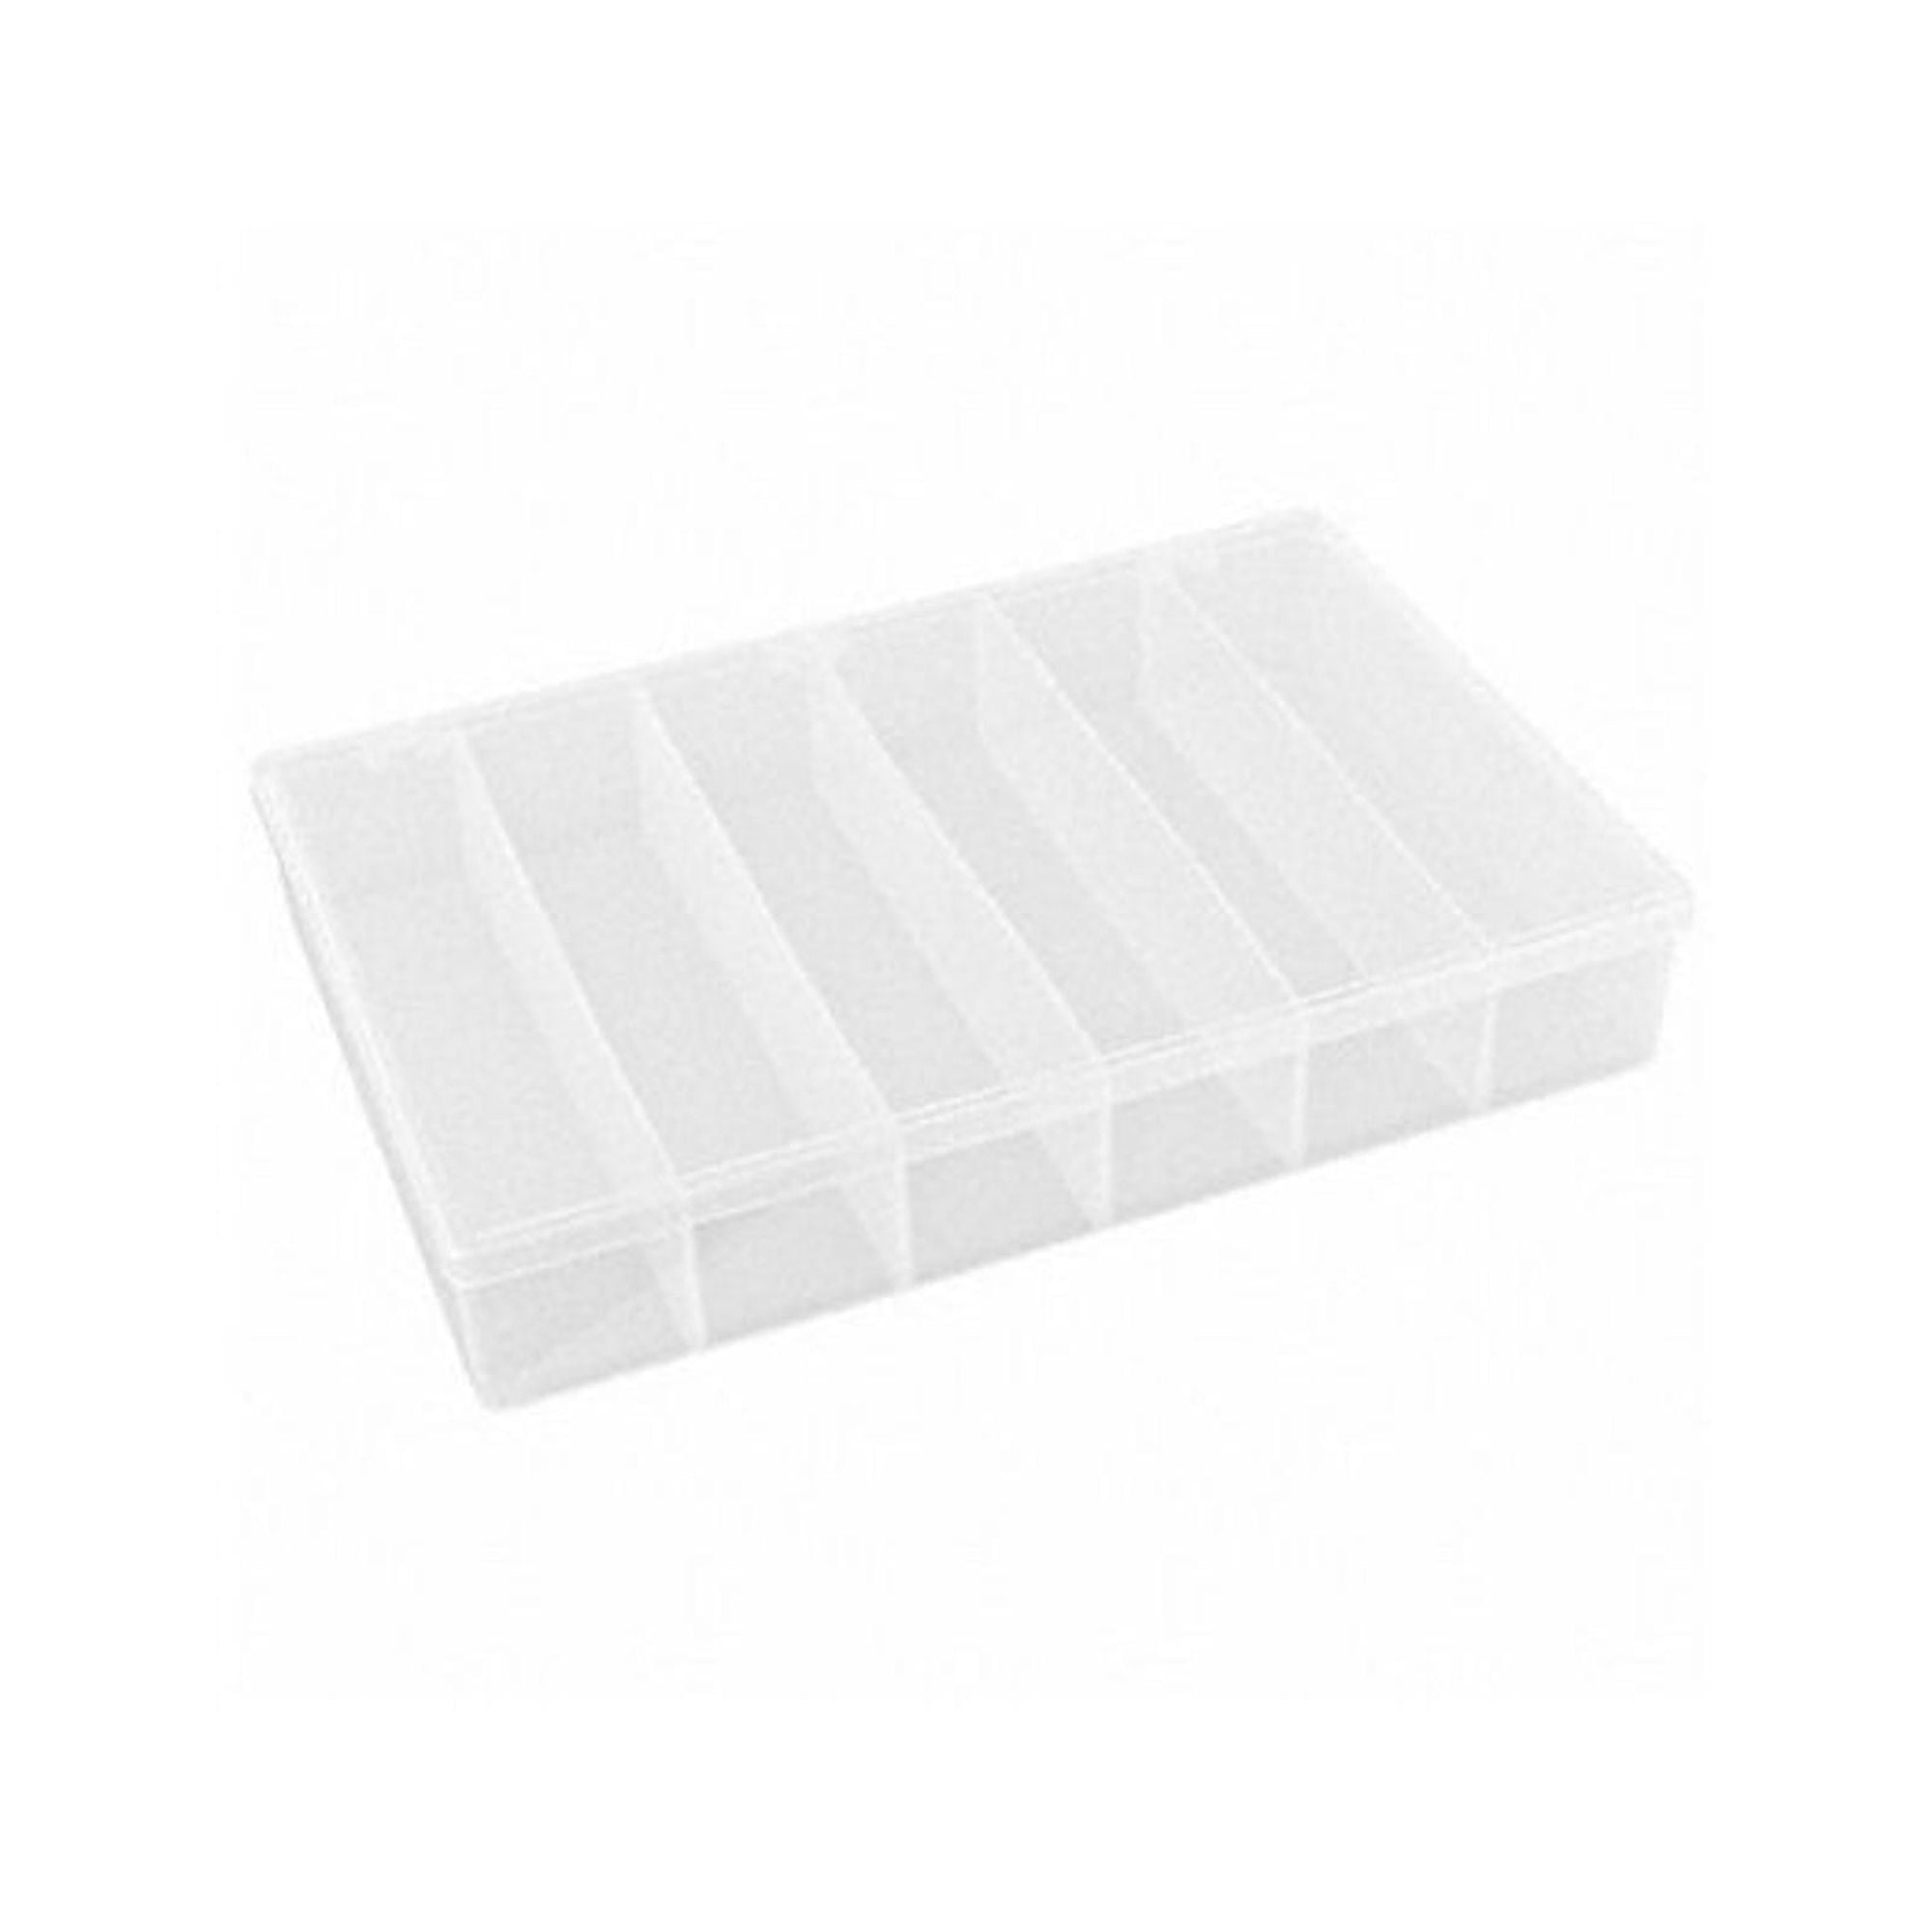 Flambeau Compartment Box,Snap,Clear,2 5/16 in T806